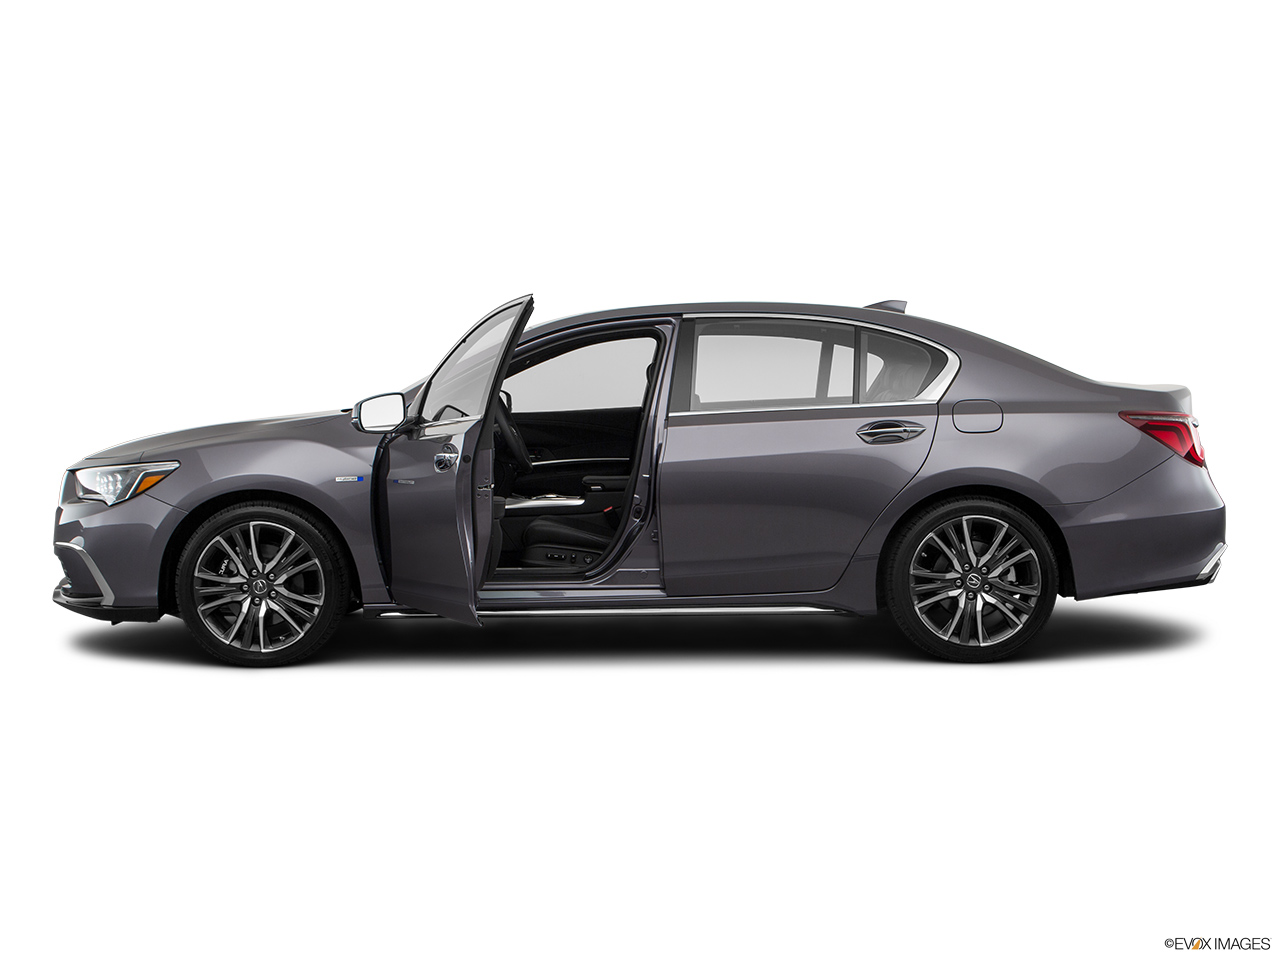 2020 Acura RLX Sport Hybrid SH-AWD Driver's side profile with drivers side door open. 